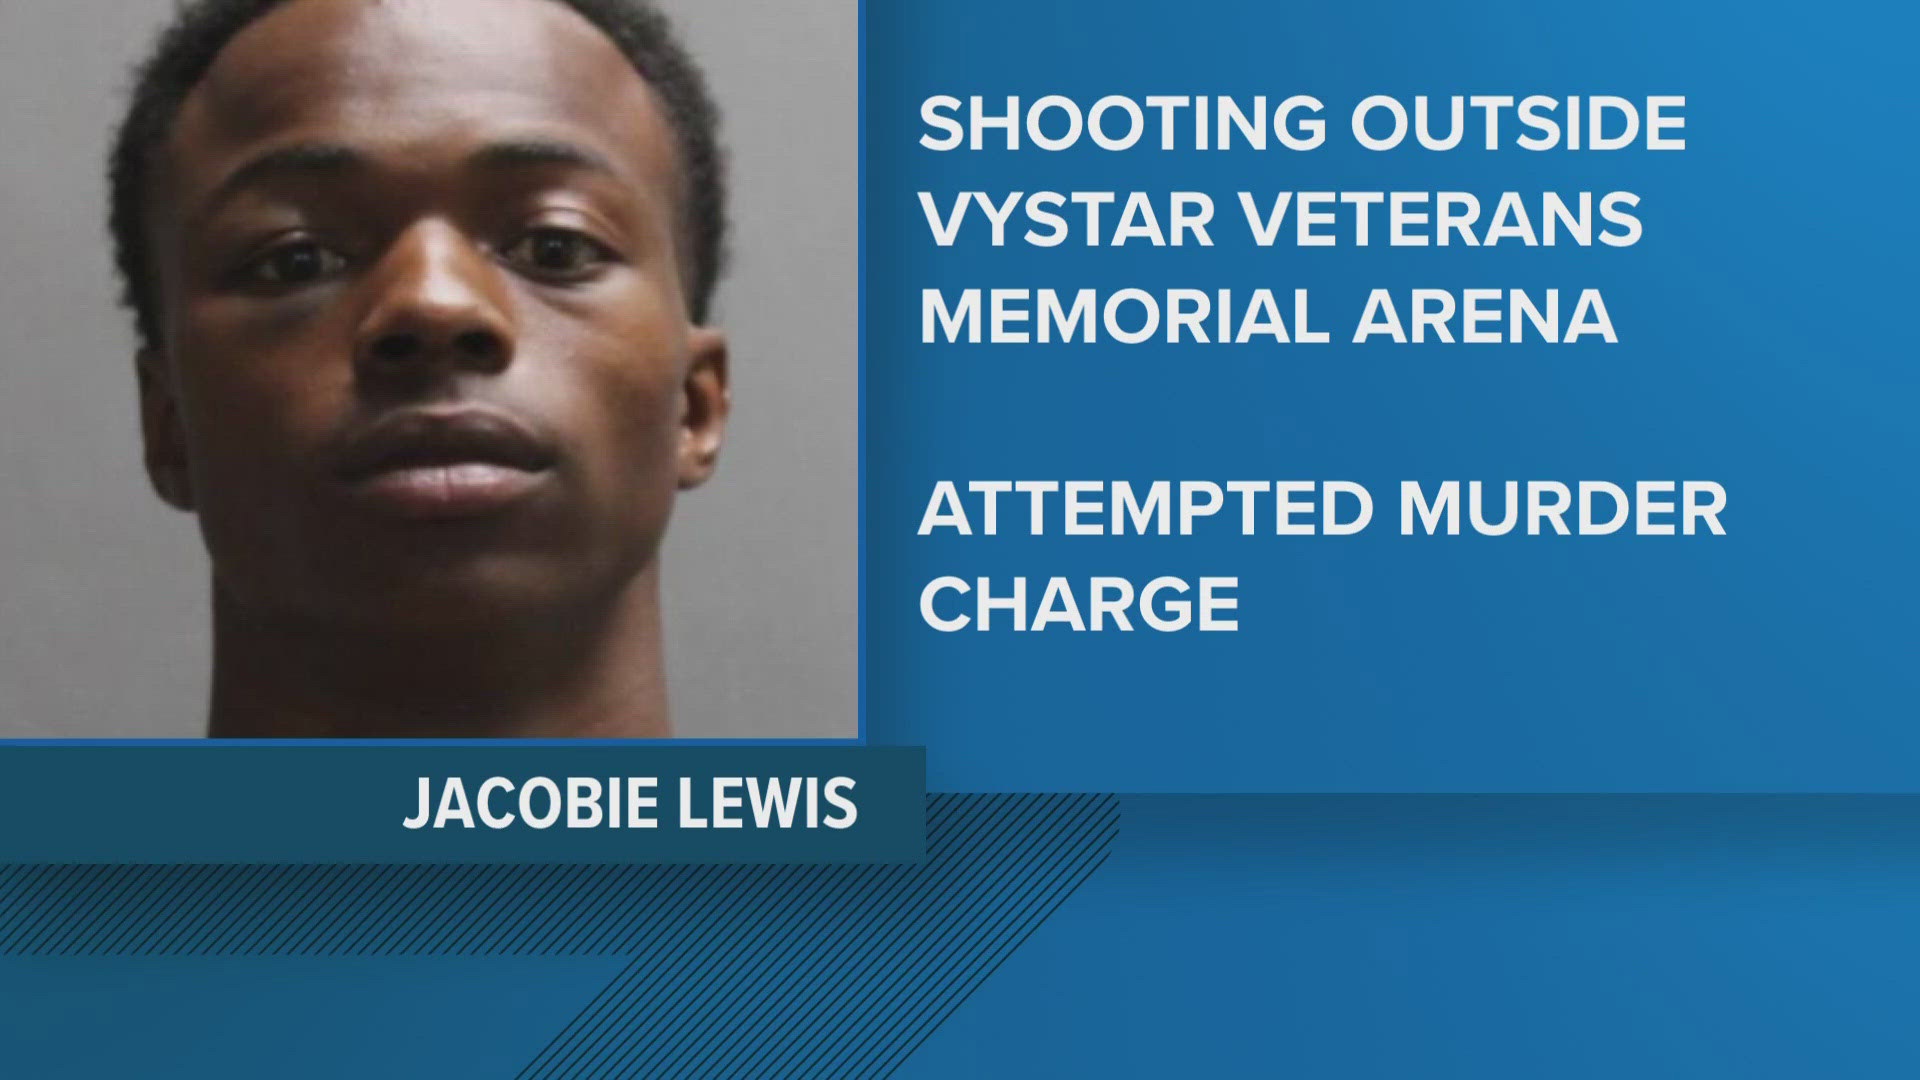 17-year-old Jacobie Lewis has been charged with attempted murder from the May 31 shooting, police say.